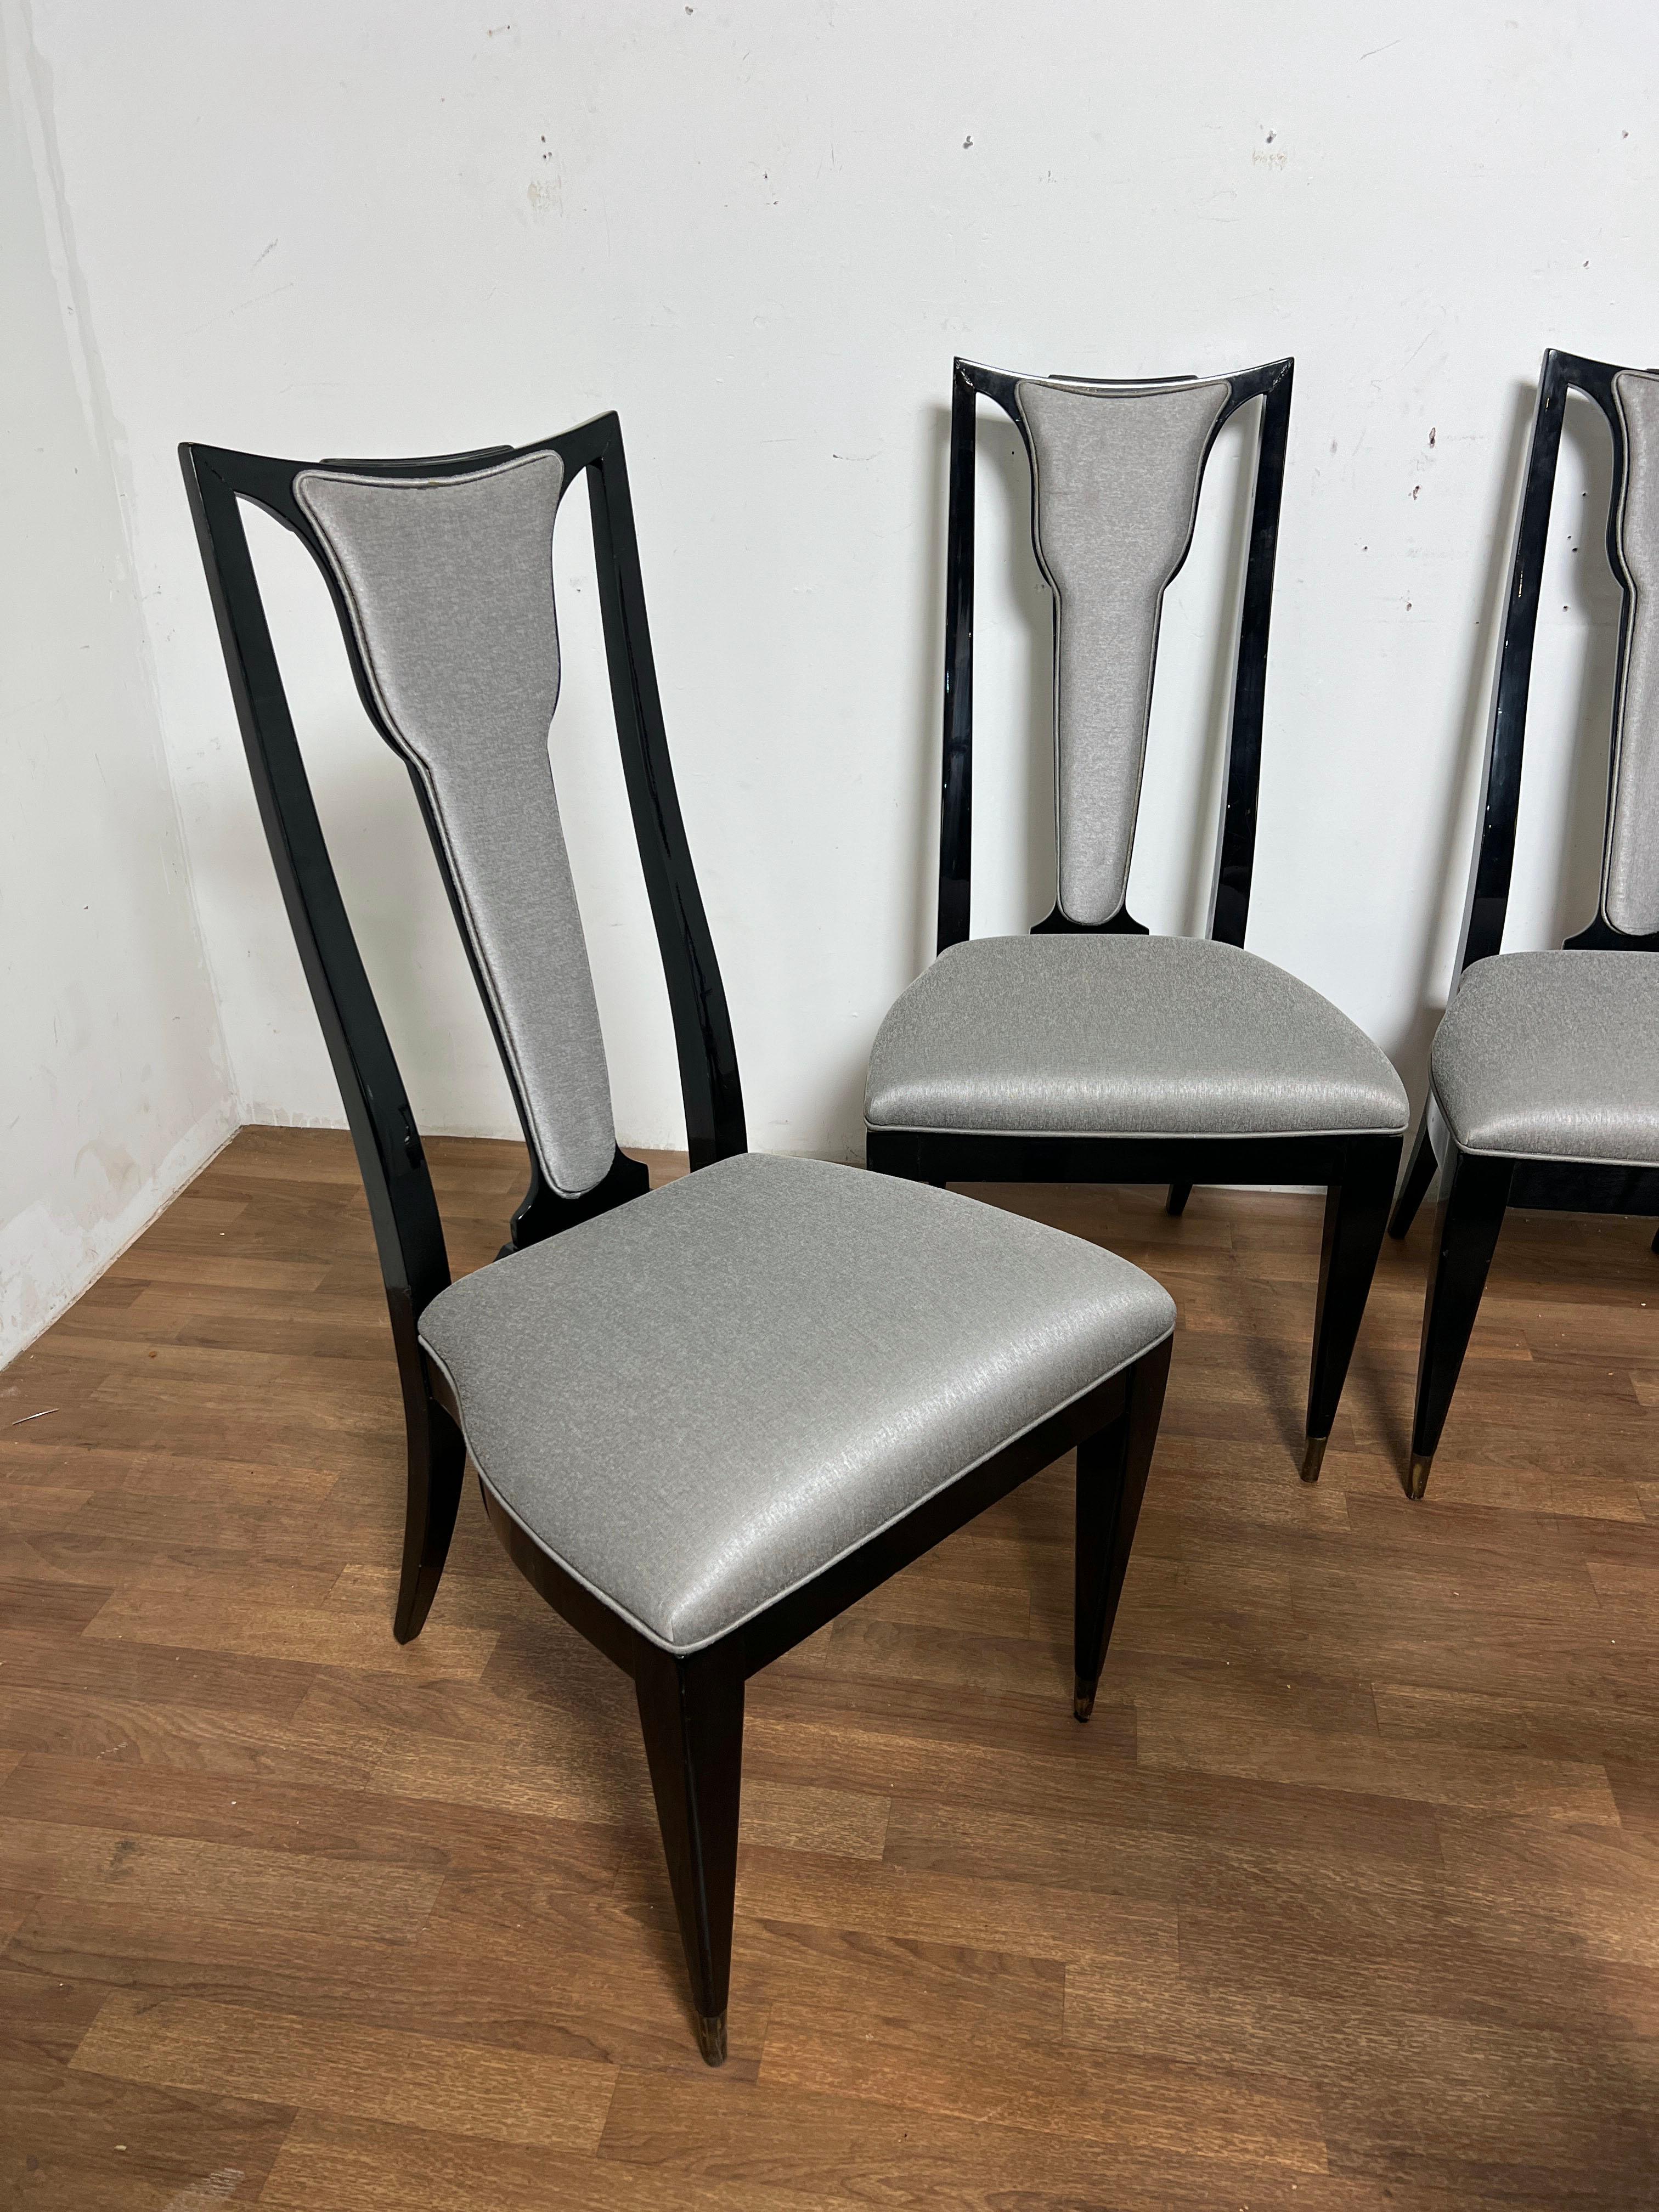 Contemporary Set of Six Italian Modern Style Dining Chairs from Ryan Korban Interior For Sale